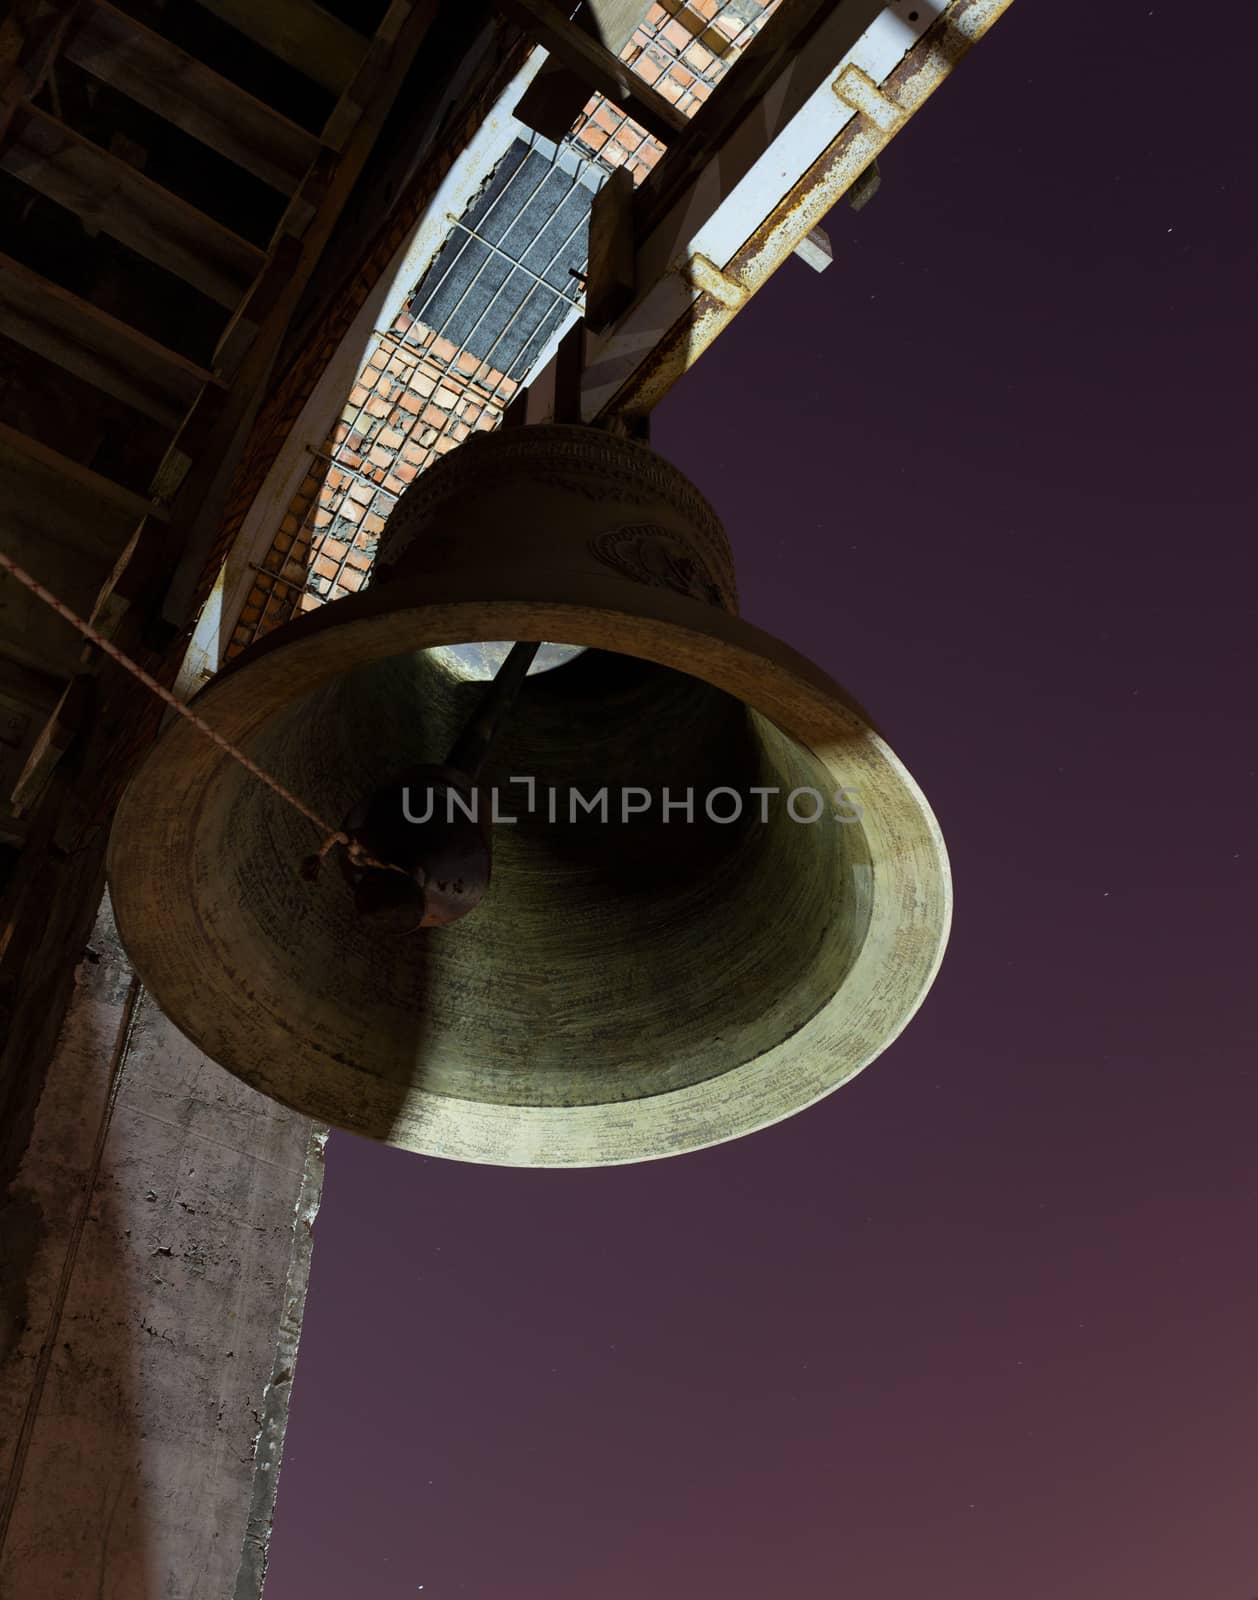 Night view at the full moon of the bells at the Cathedrals' belfry by straannick